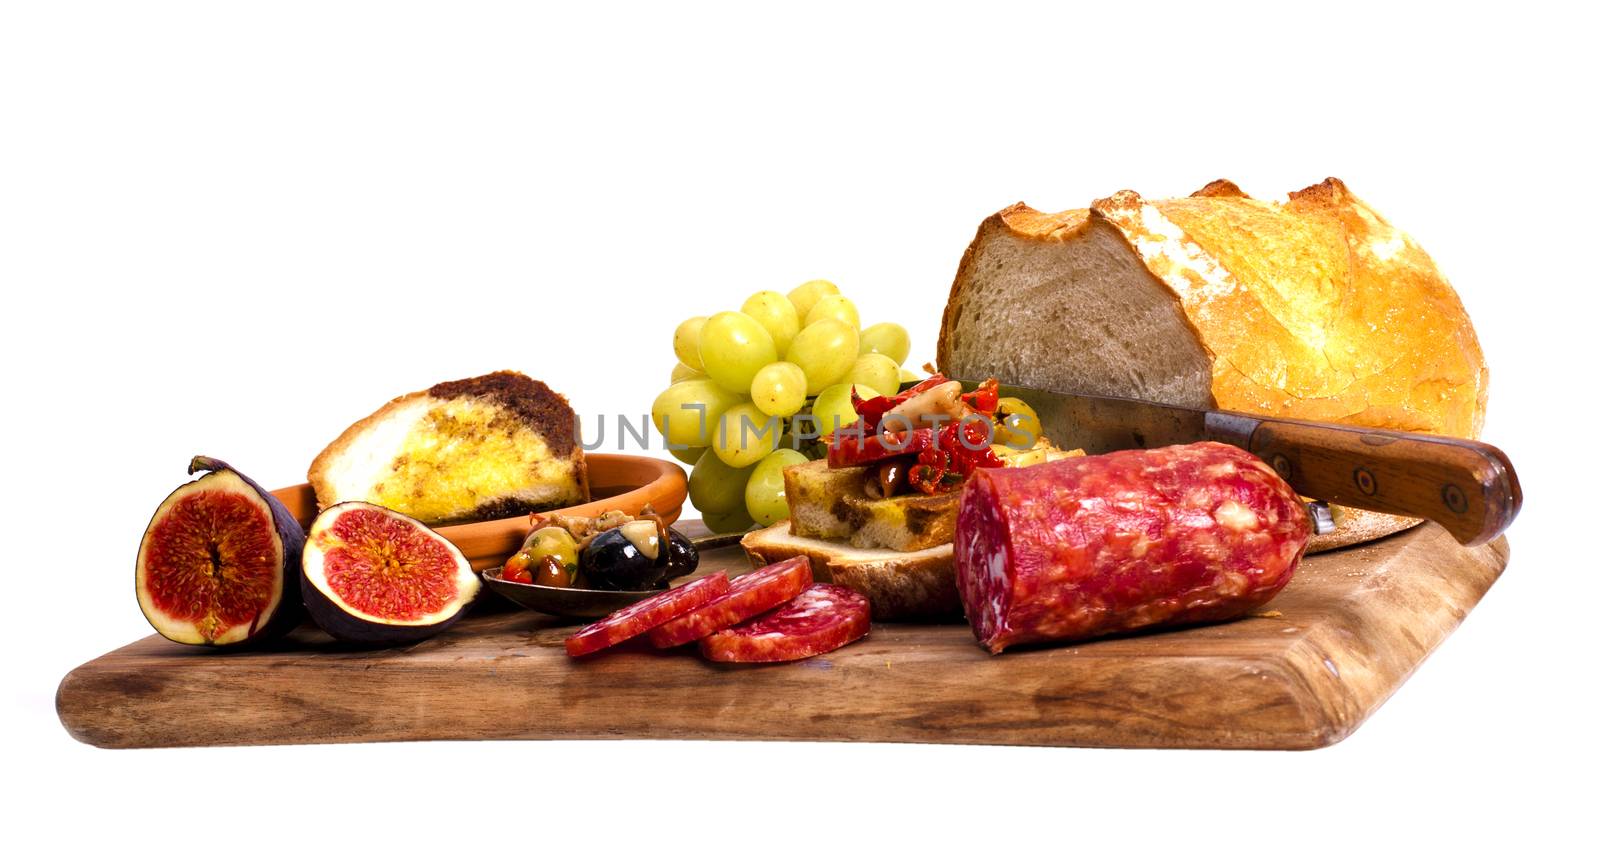 Antipasto catering platter with salami and cheese on a wooden board.